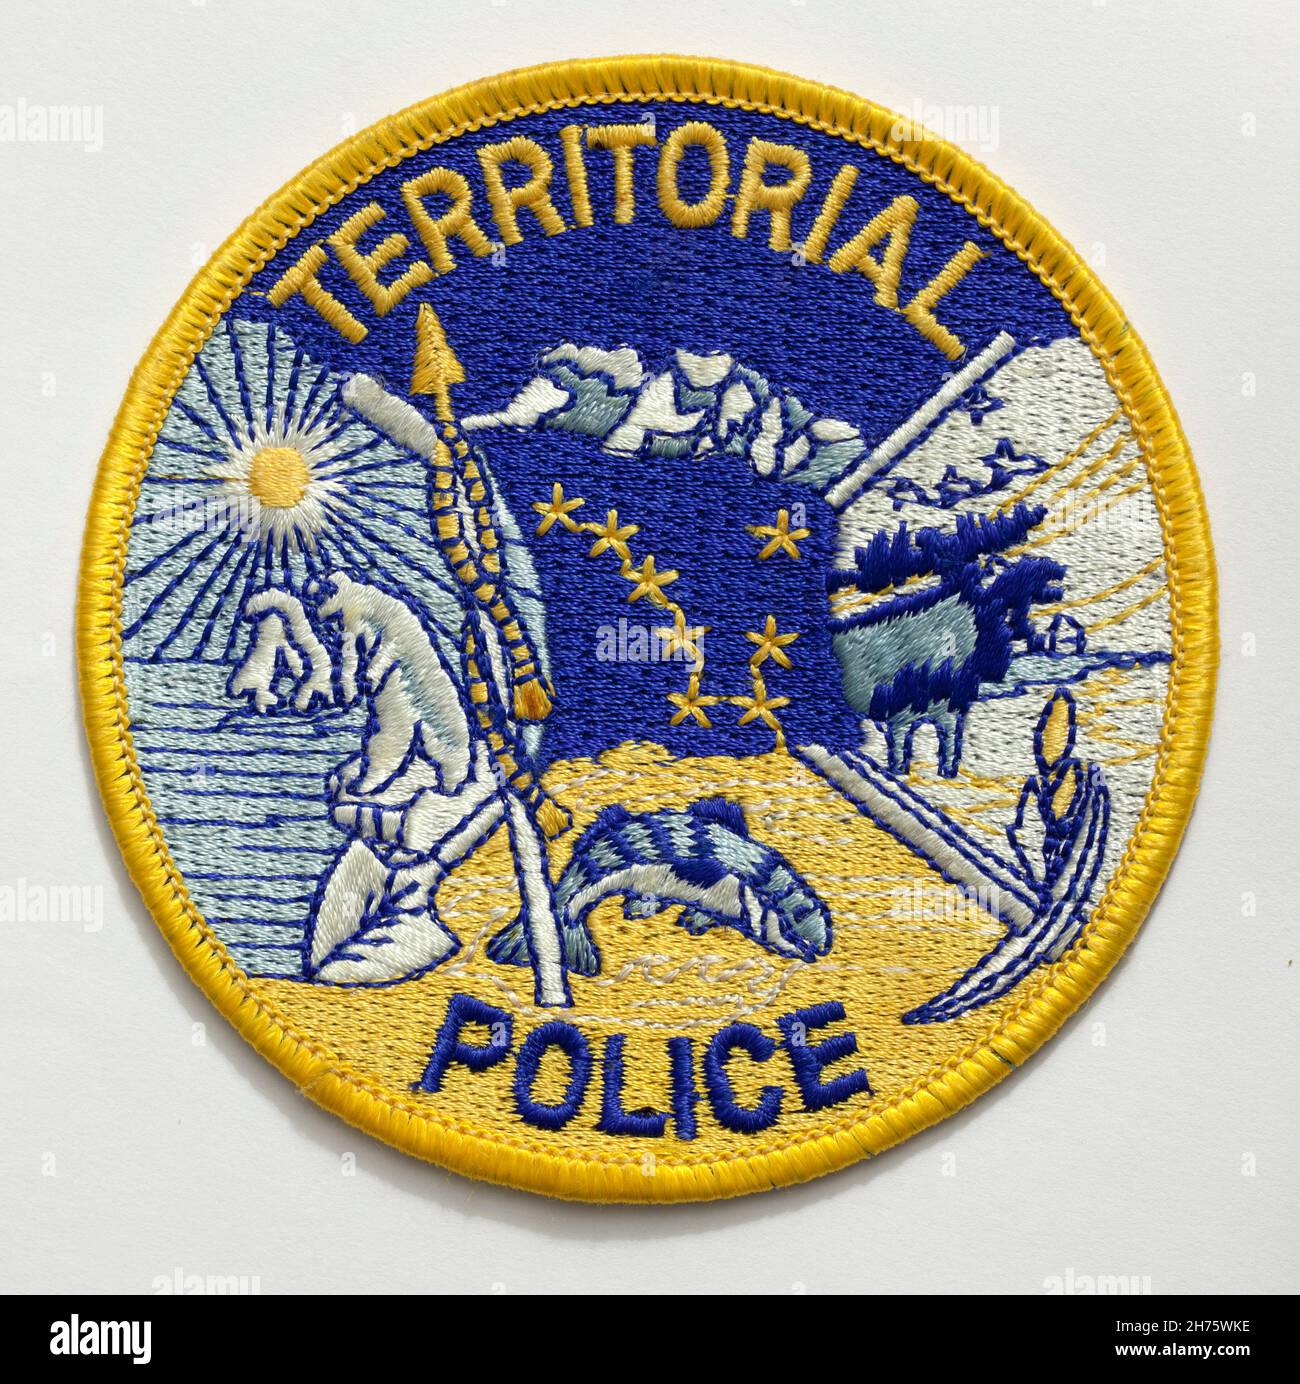 Territorial Police Badge Patch Stock Photo